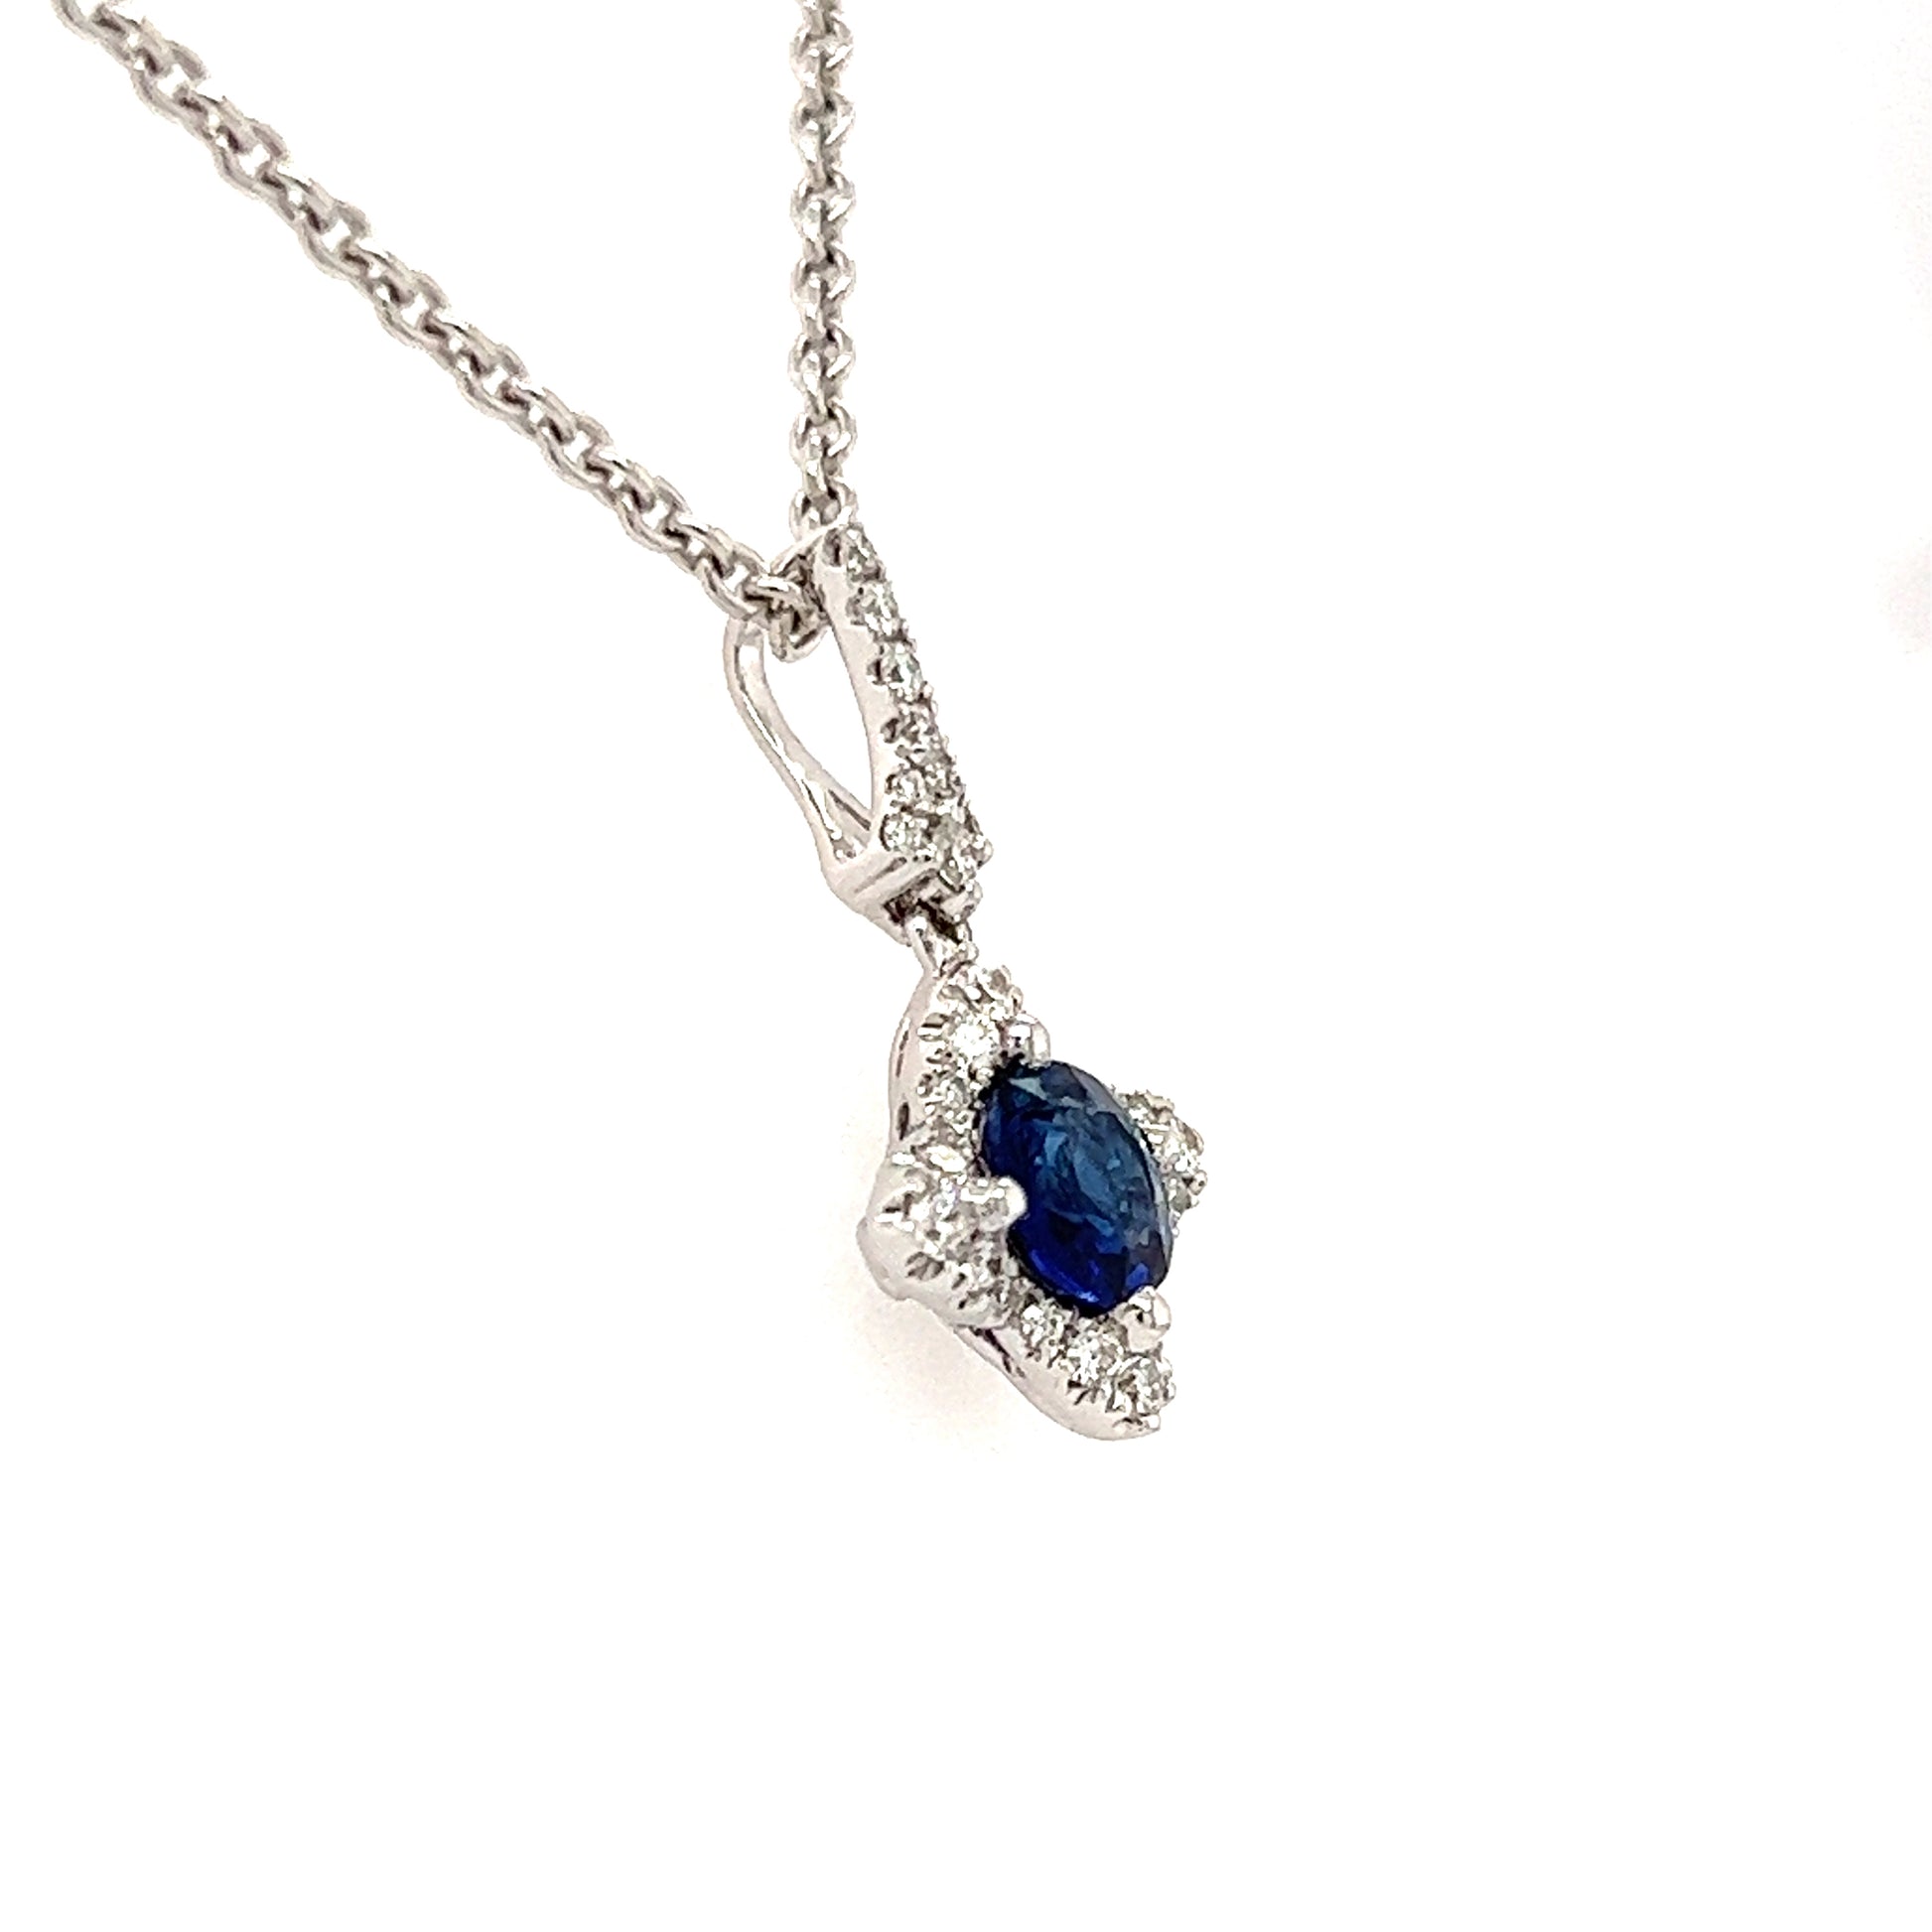 Floral Round Sapphire Pendant with 29 Diamonds in 18K White Gold Pendant and Chain Right Side View